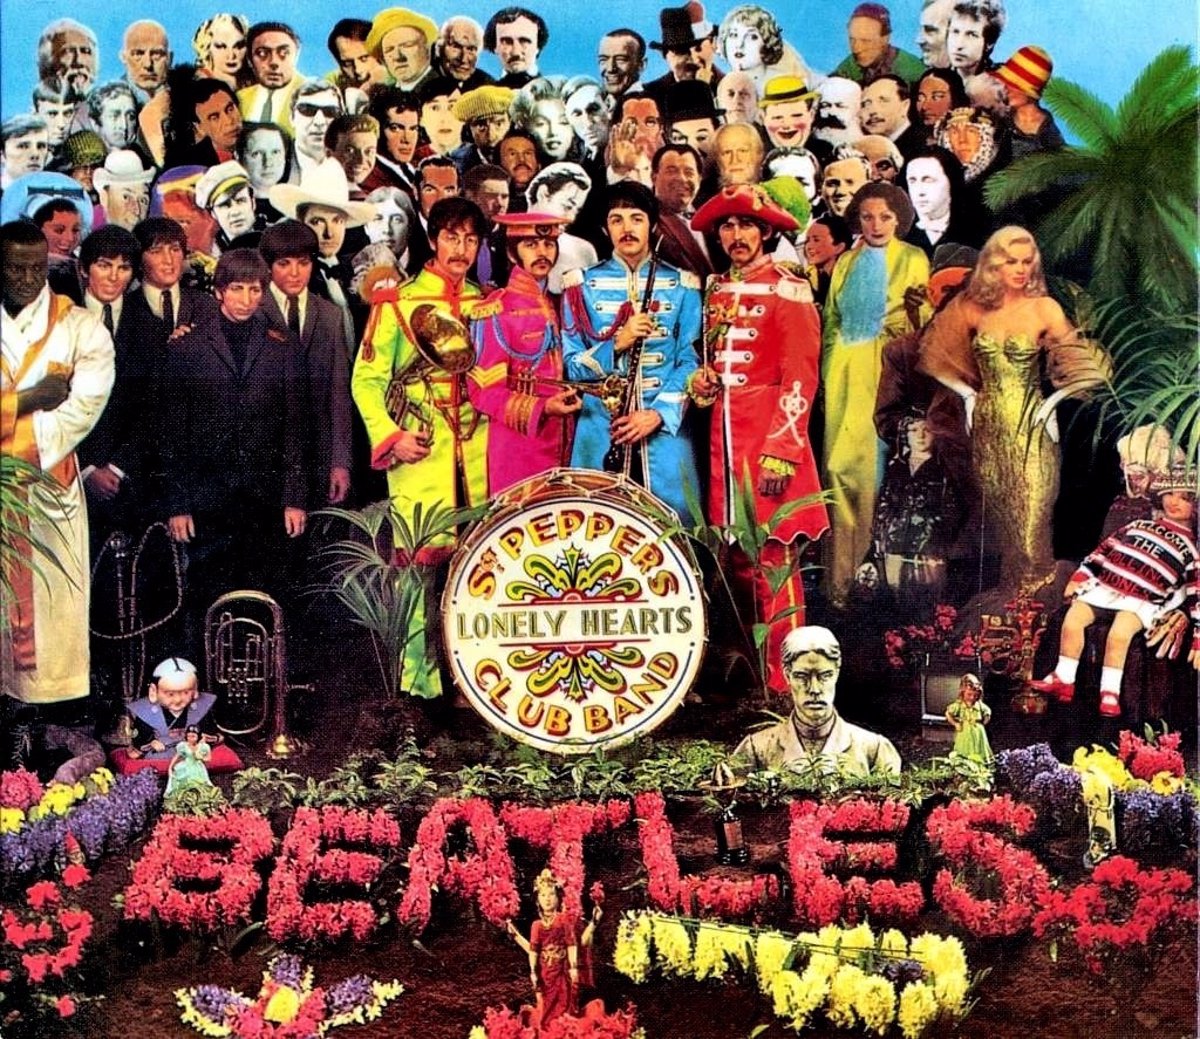 SGT PEPPER's LONELY HEARTS CLUB BAND